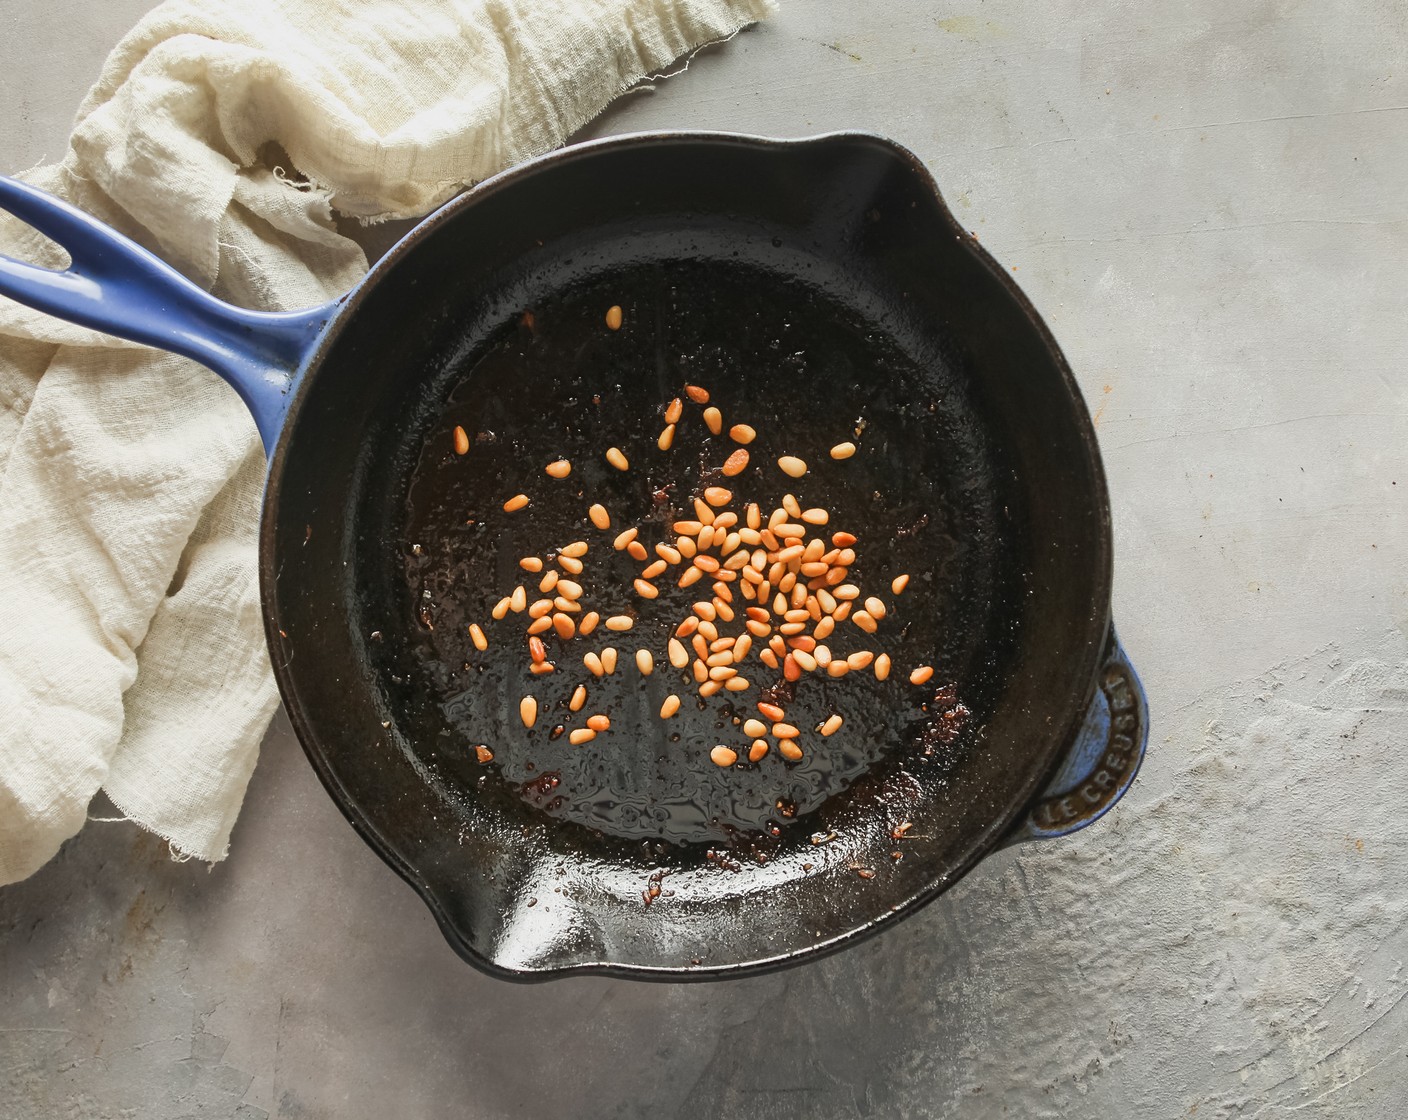 step 2 While the water is boiling, heat the Vegetable Oil (2 Tbsp) in a medium skillet over low heat. When the oil is shimmering, add the Pine Nuts (2 Tbsp) and cook for 2-3 minutes, until golden brown and toasted. Transfer to a papertowel-lined plate.